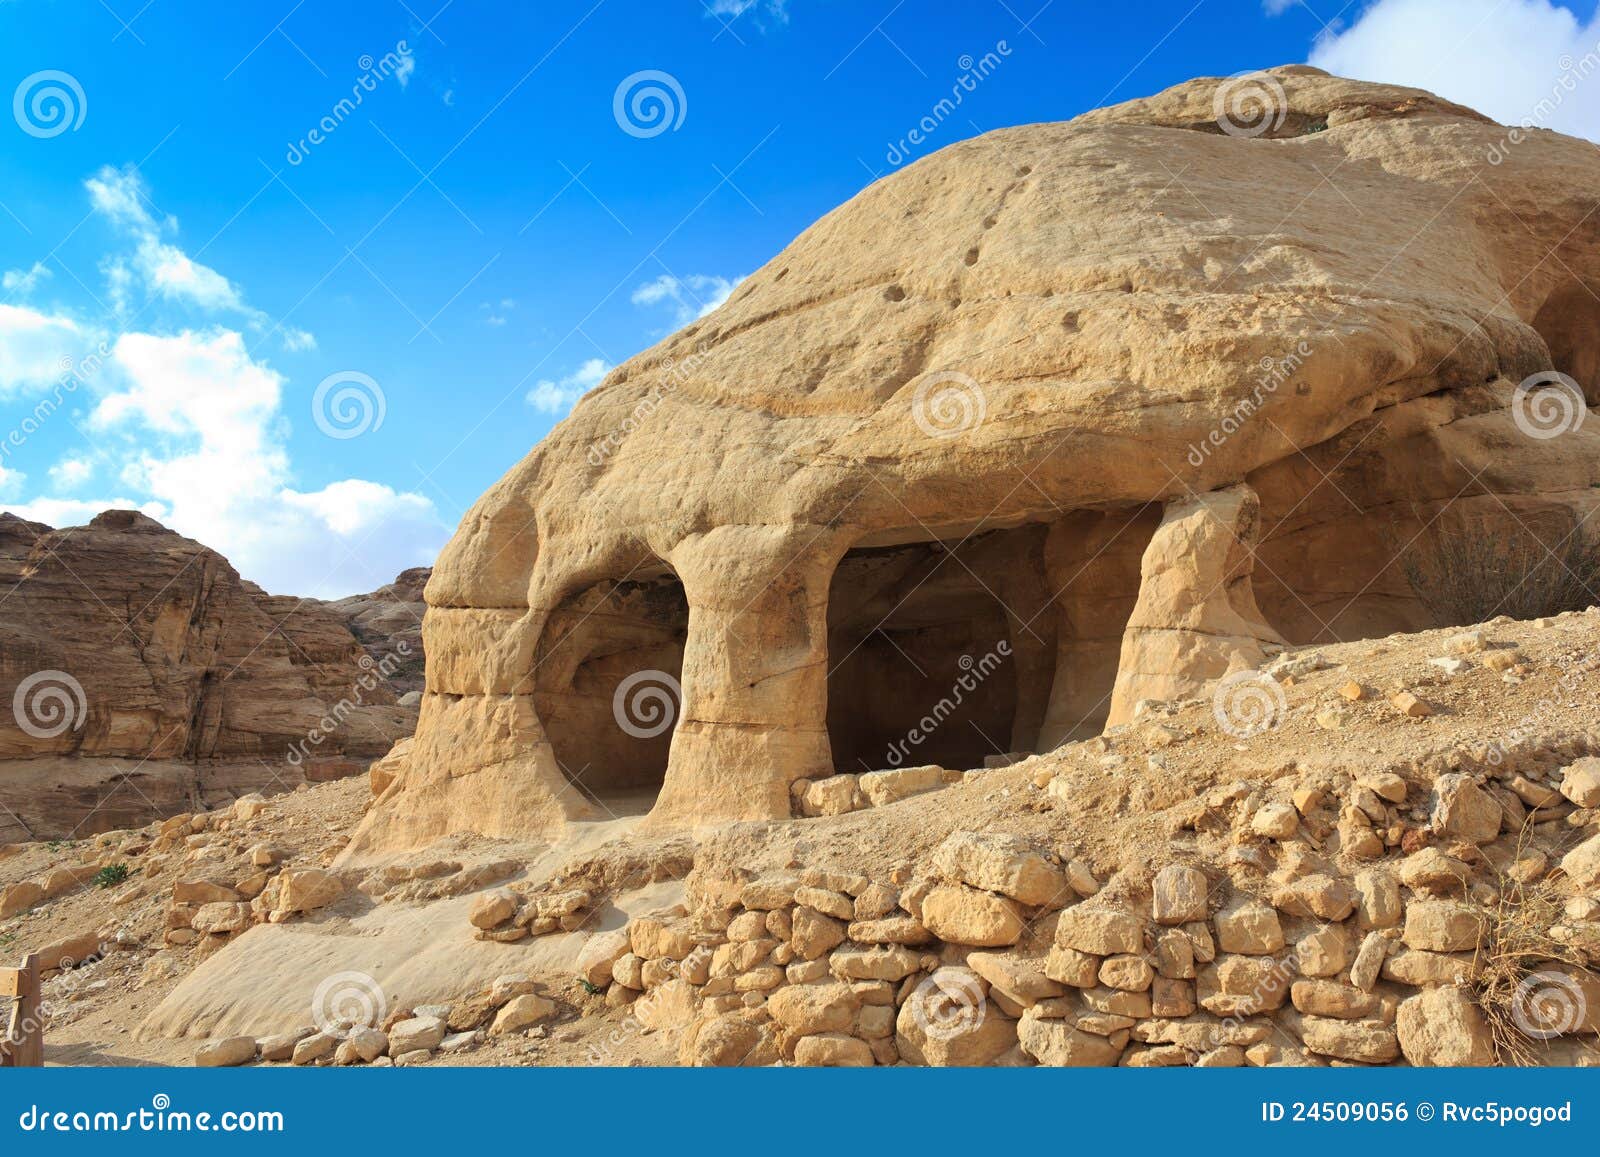 stone cave home in bab as-siq, petra